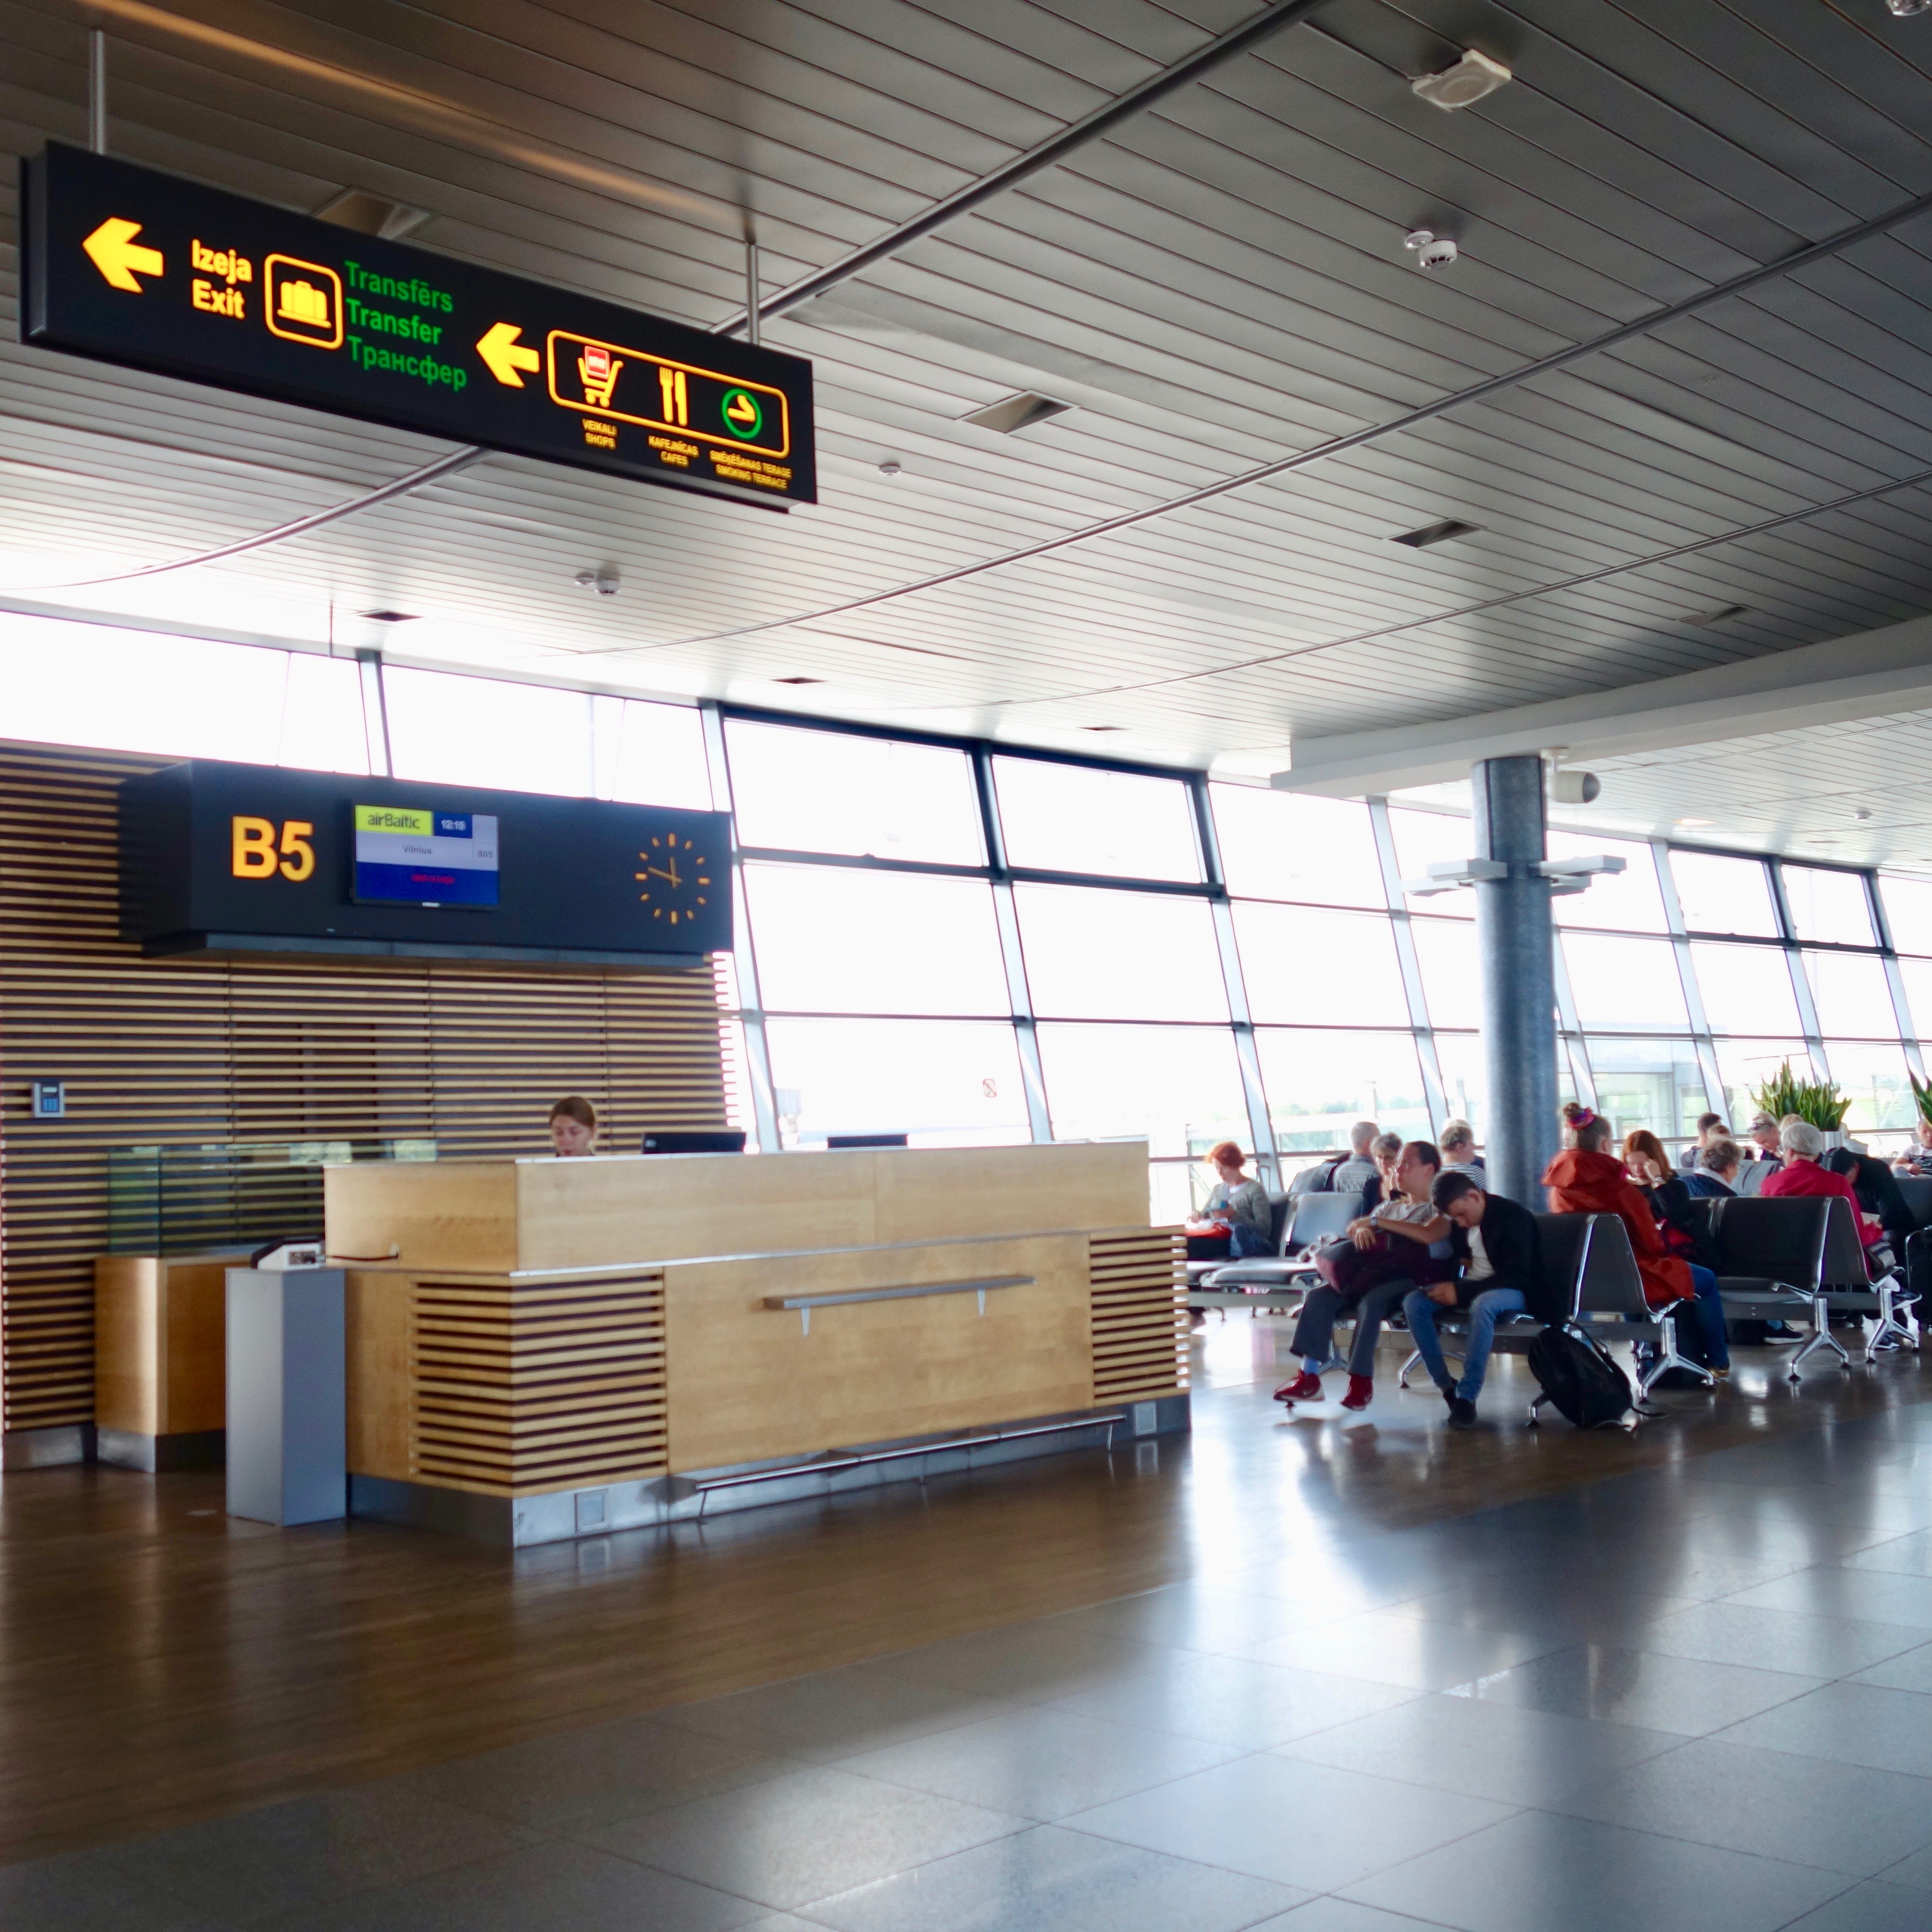 Sleek new gate podium at Riga airport in Latvia.  airBaltic operates their hub here and the blond colored slats that form the podium create a modern look and feel.  A wall of glass allows in abundance of light as passengers wait in seating near the gate.  